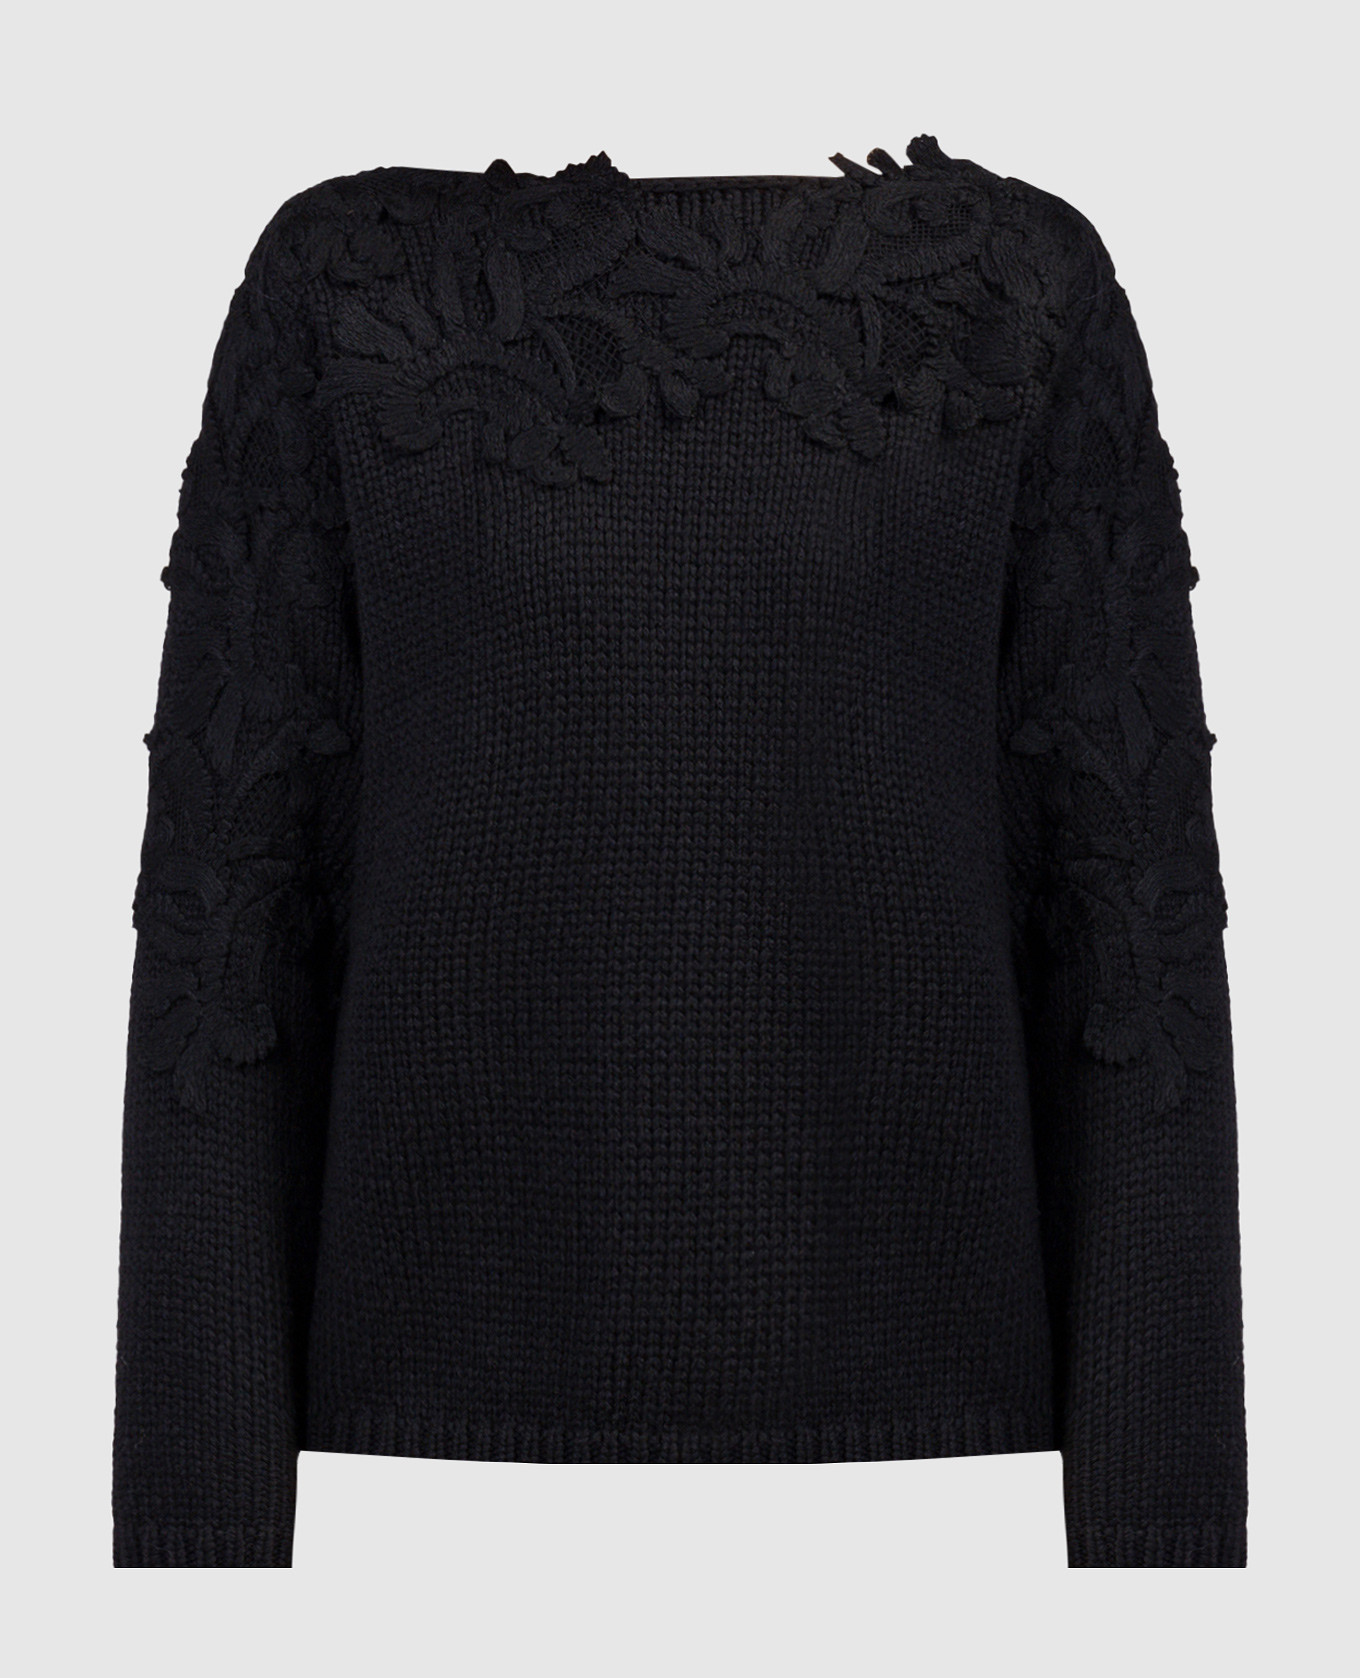 Black wool sweater with lace